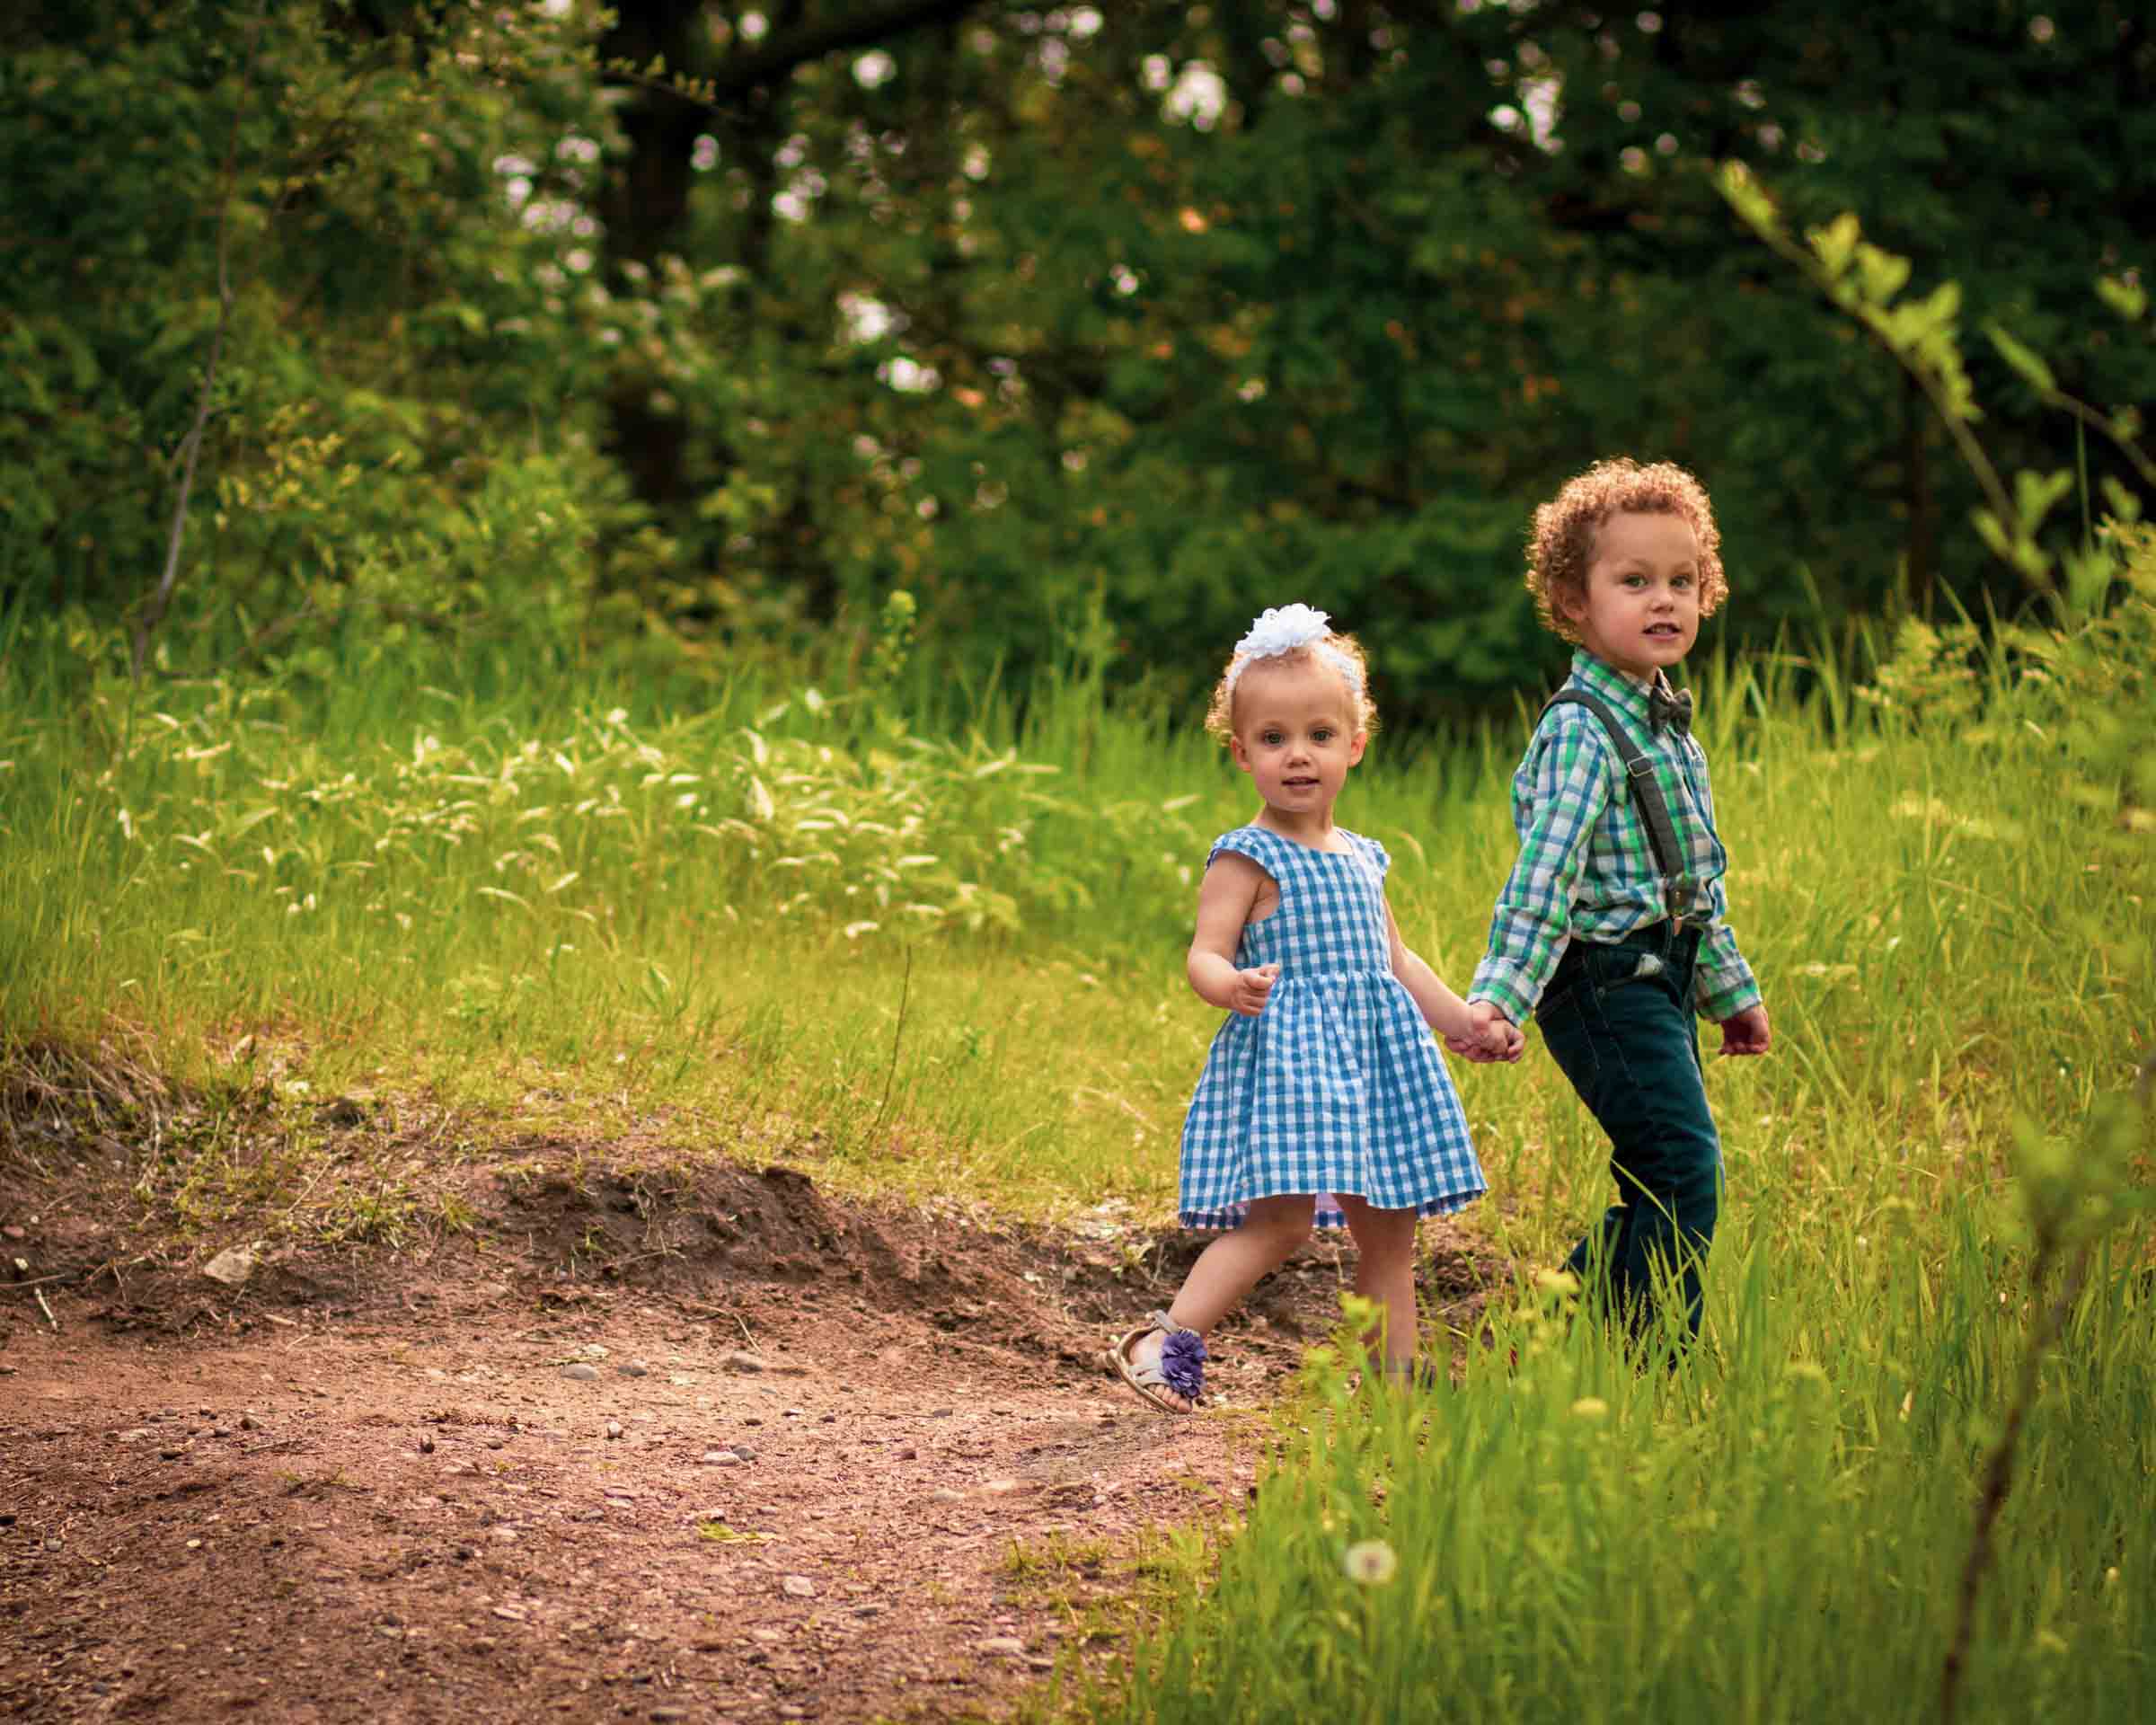 brother and sister walking hand in hand in field minneapolis minnesota family photography